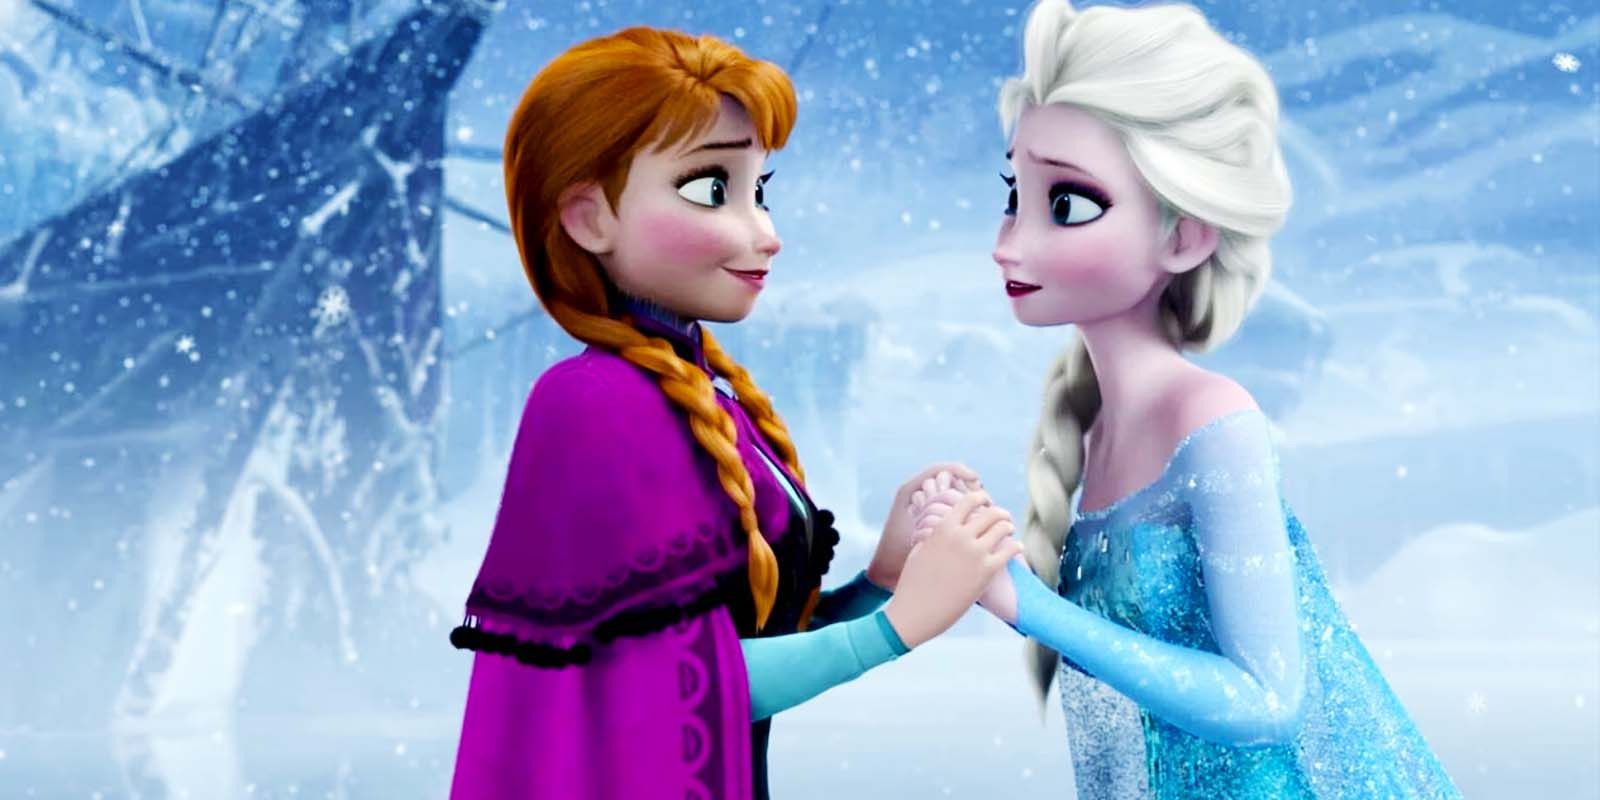 Anna and Elsa hold hands smiling at one another.